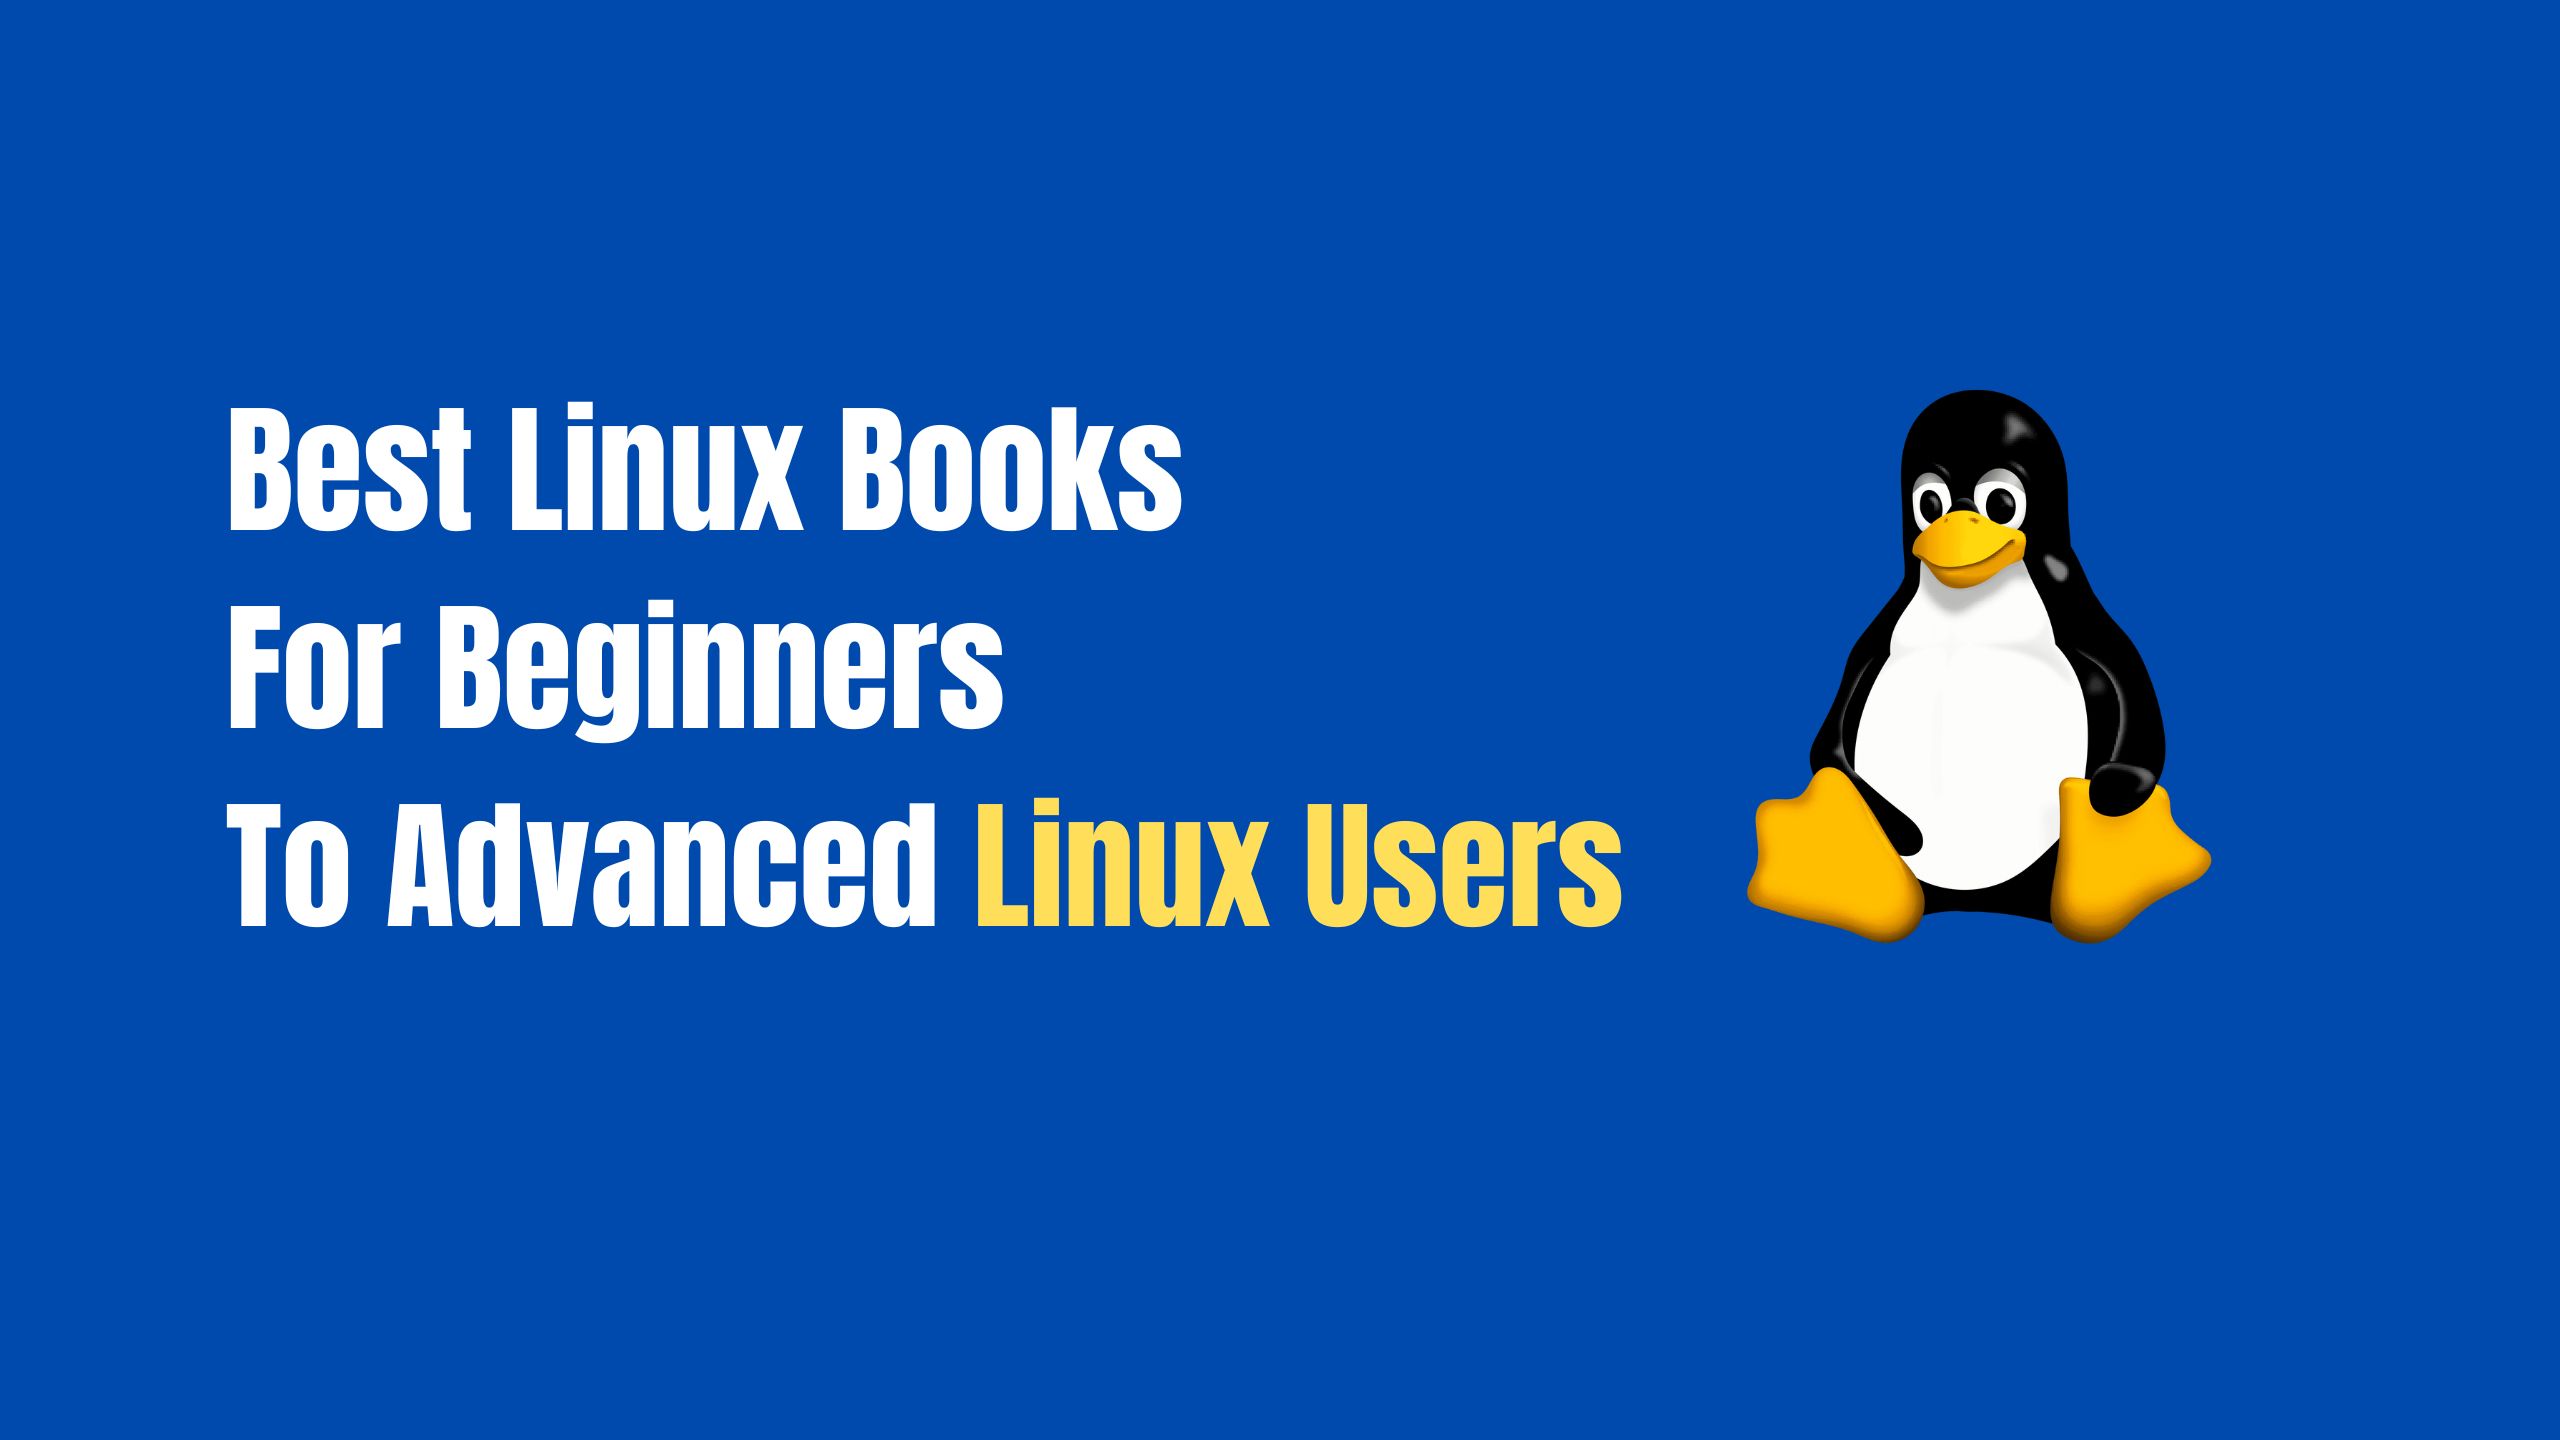 Best Linux Books For Beginners To Advanced Linux Users